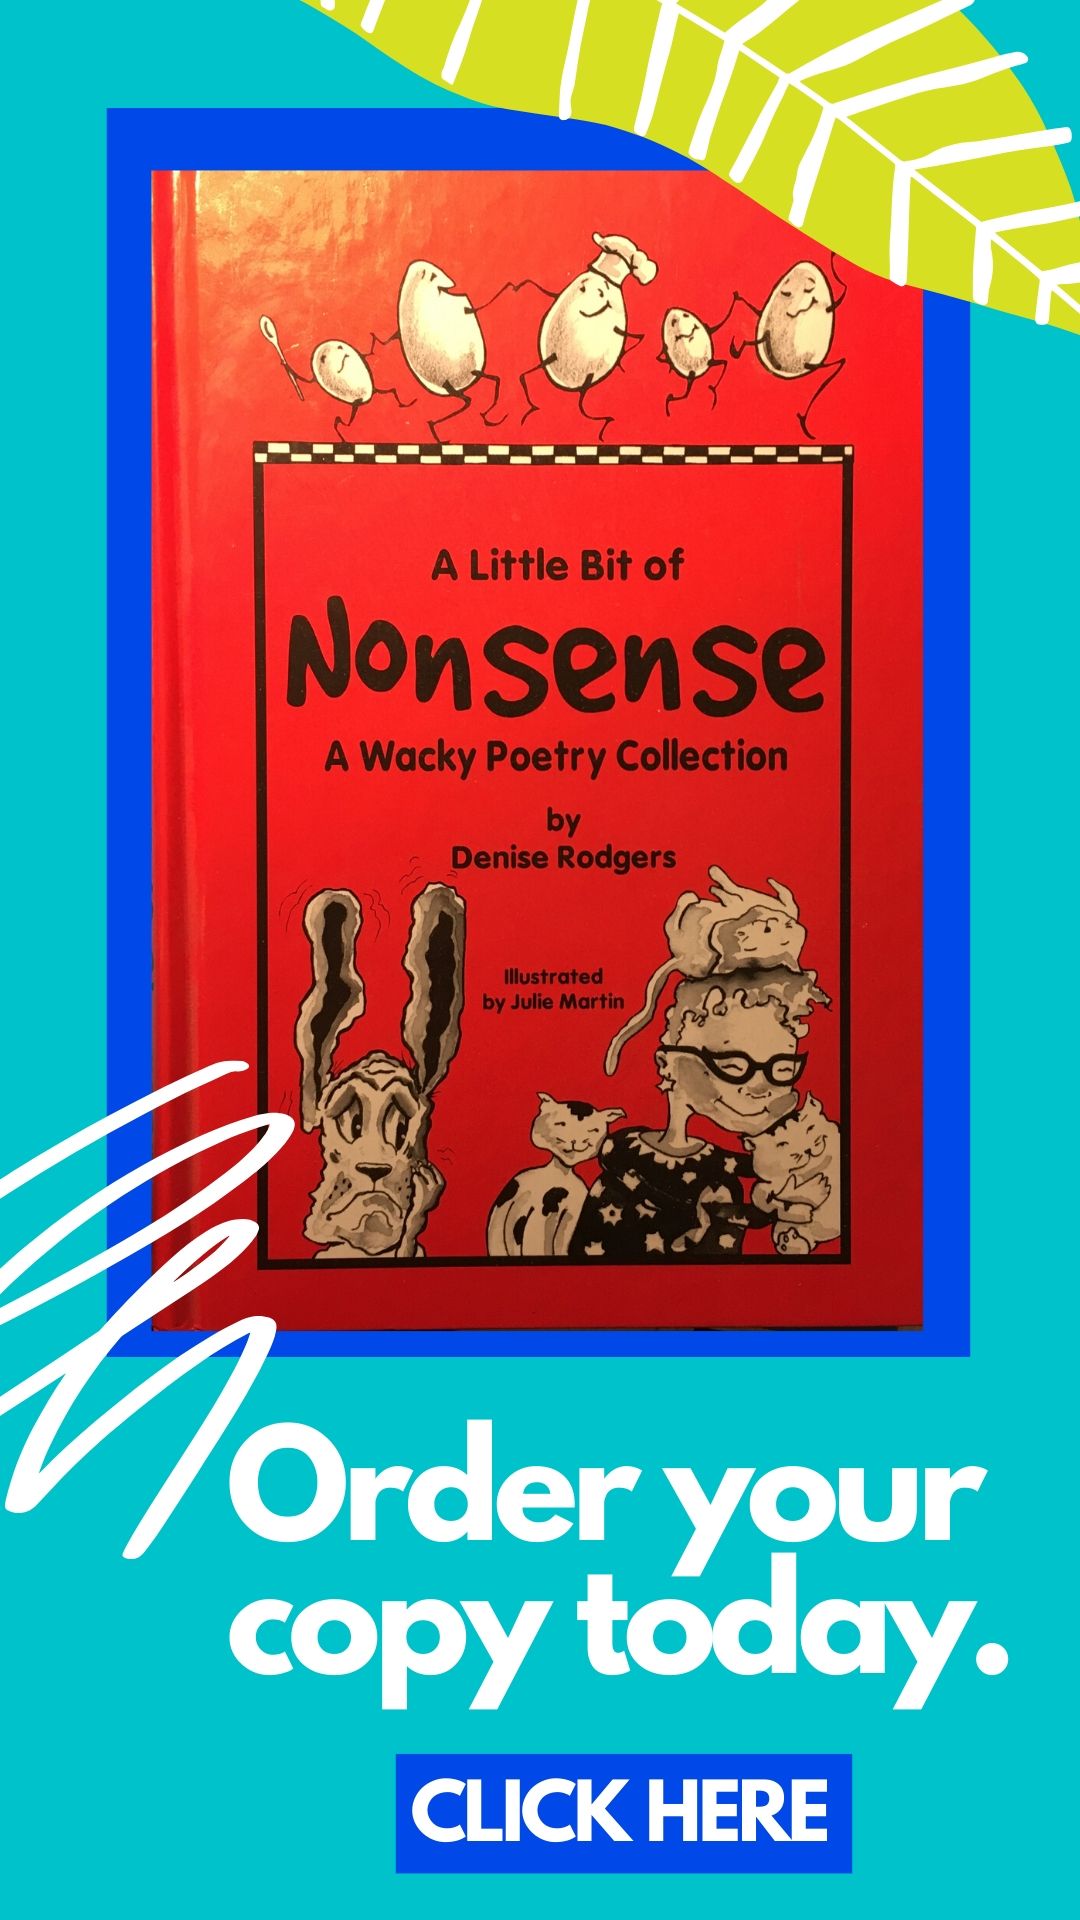 A Little Bit of Nonsense by Denise Rodgers on ClassroomPoems.com.